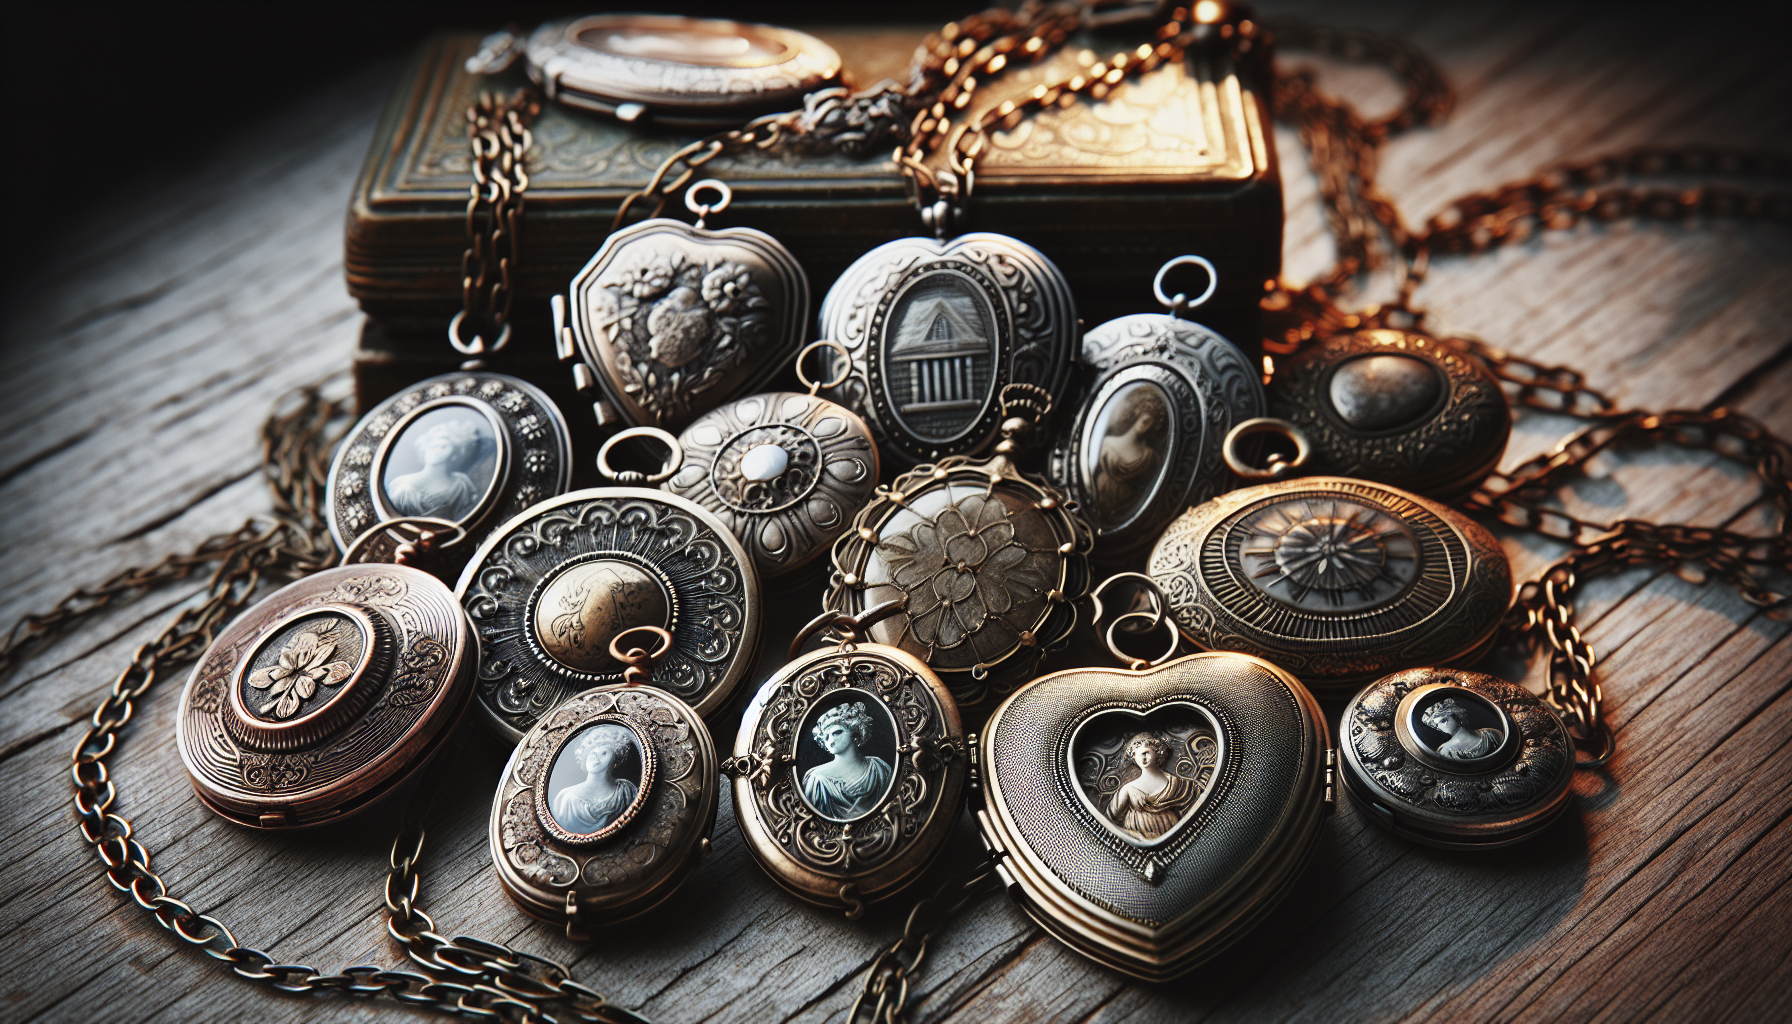 A collection of vintage lockets is presented. They're timeless pieces of jewelry, found nestled within an old jewelry box. Each locket is unique, with its own detailed engraving and design, embodying 